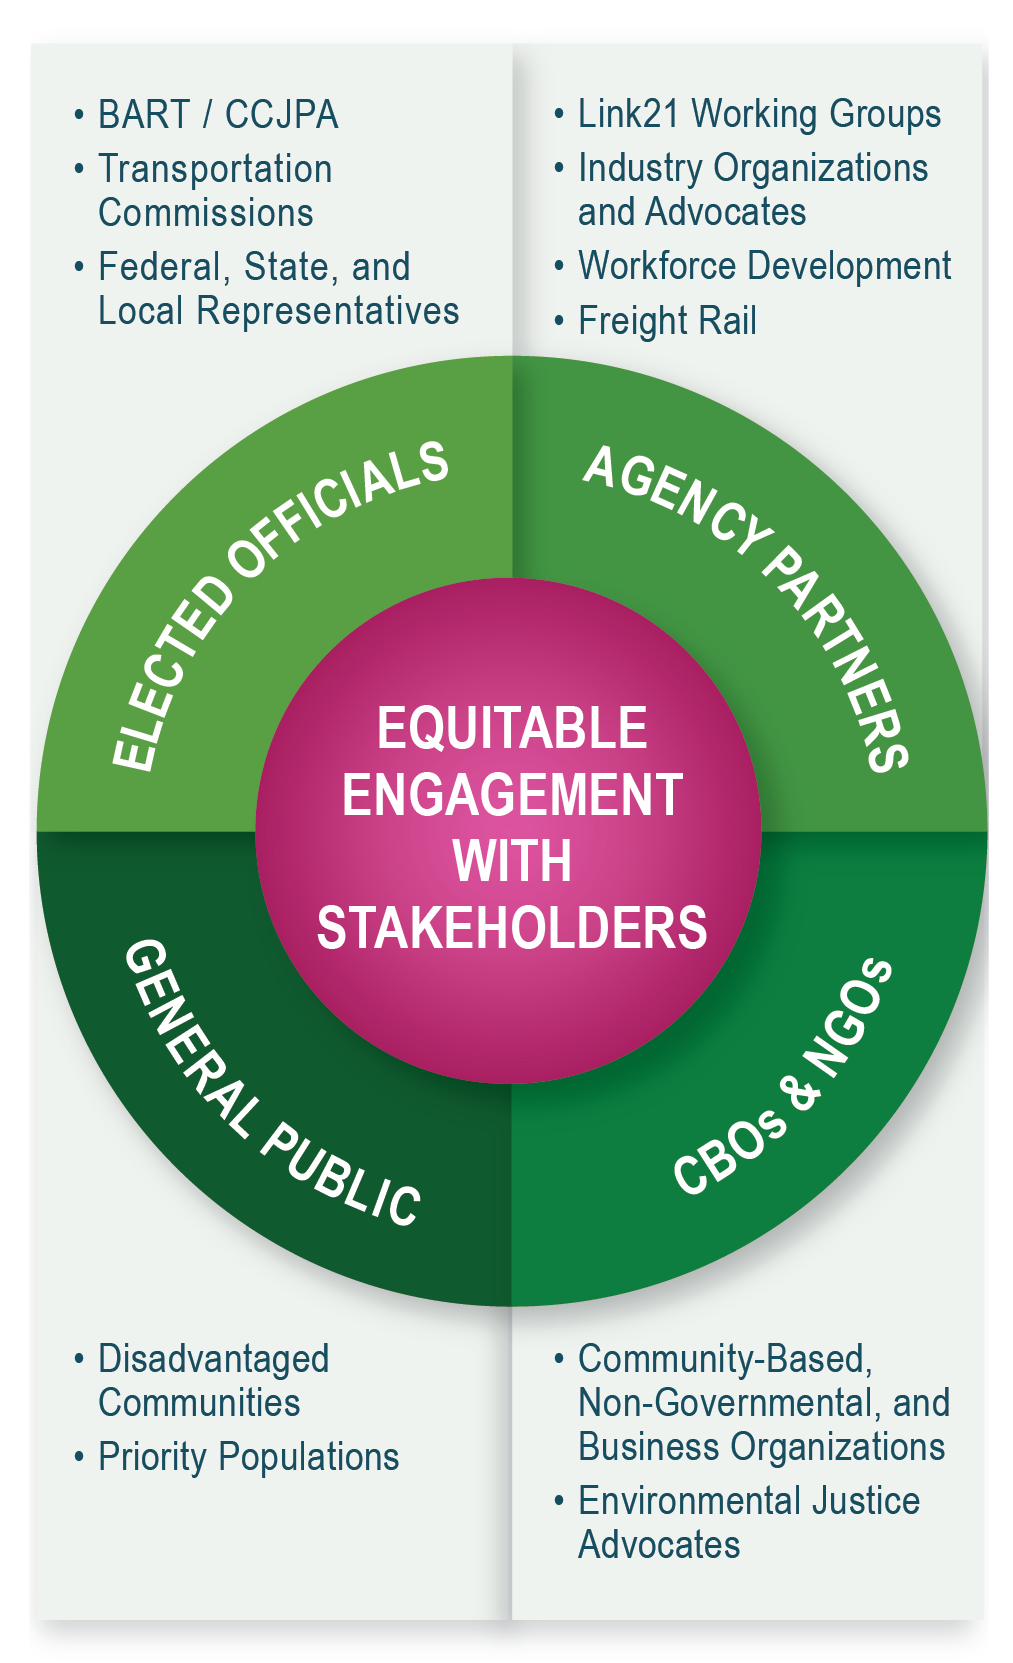 Equitable Engagement wit Stakeholders graphic